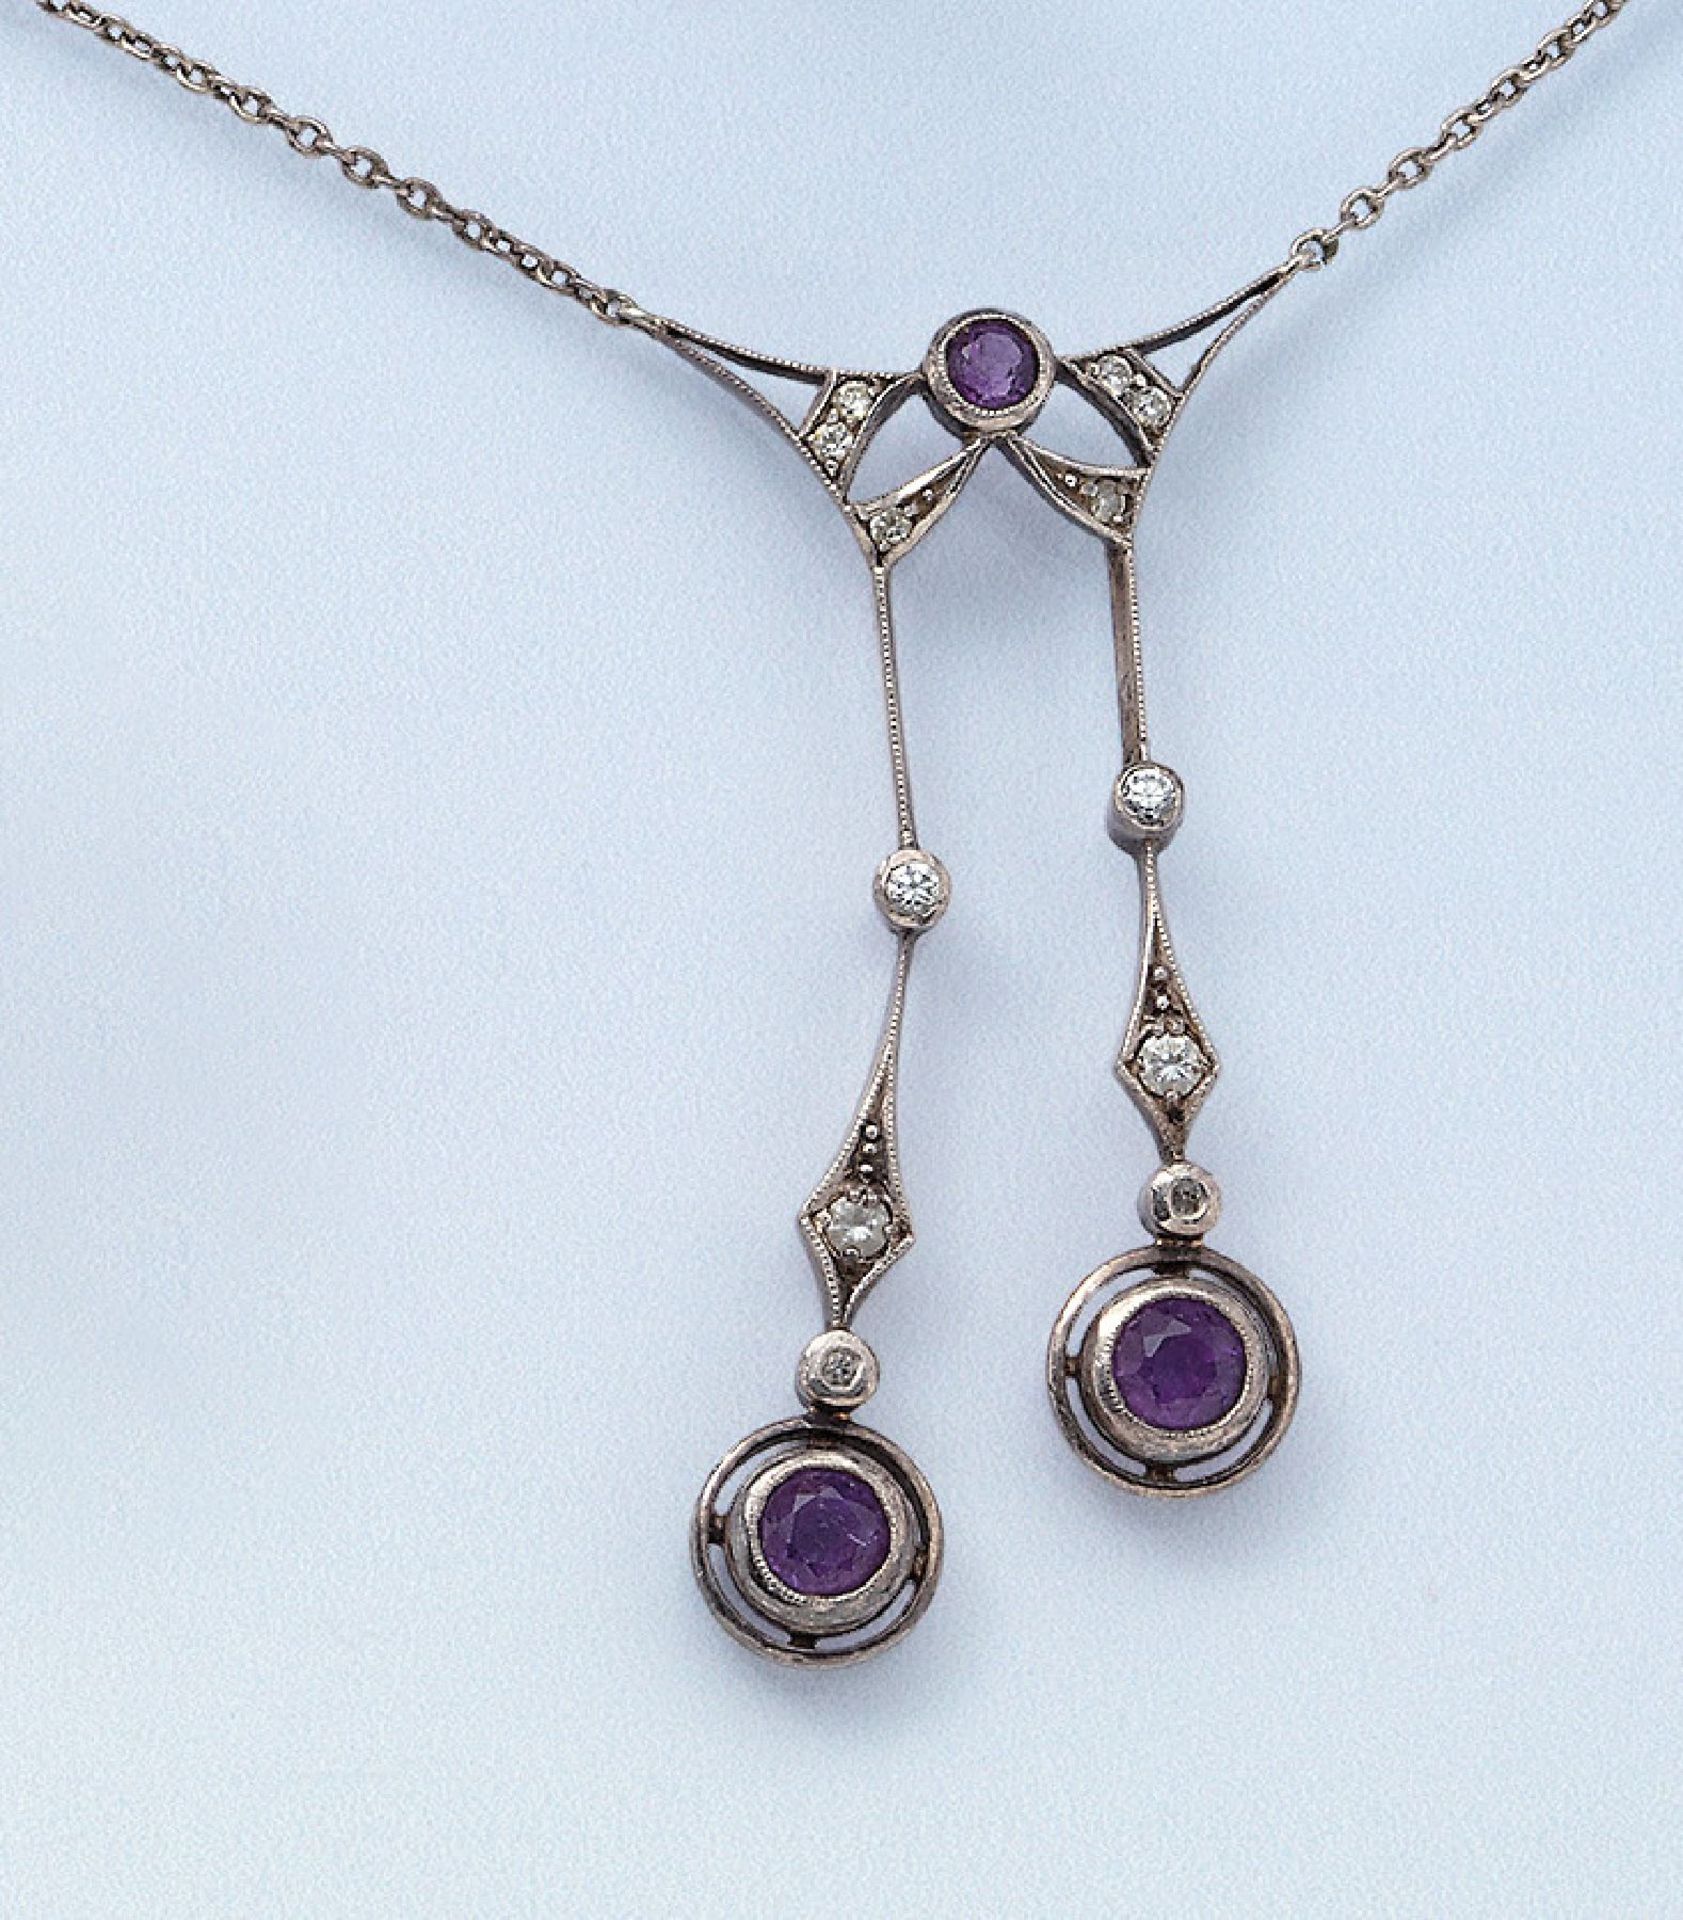 Art Nouveau necklace with amethyst and diamonds , YG 585/000 and silver 750, probably